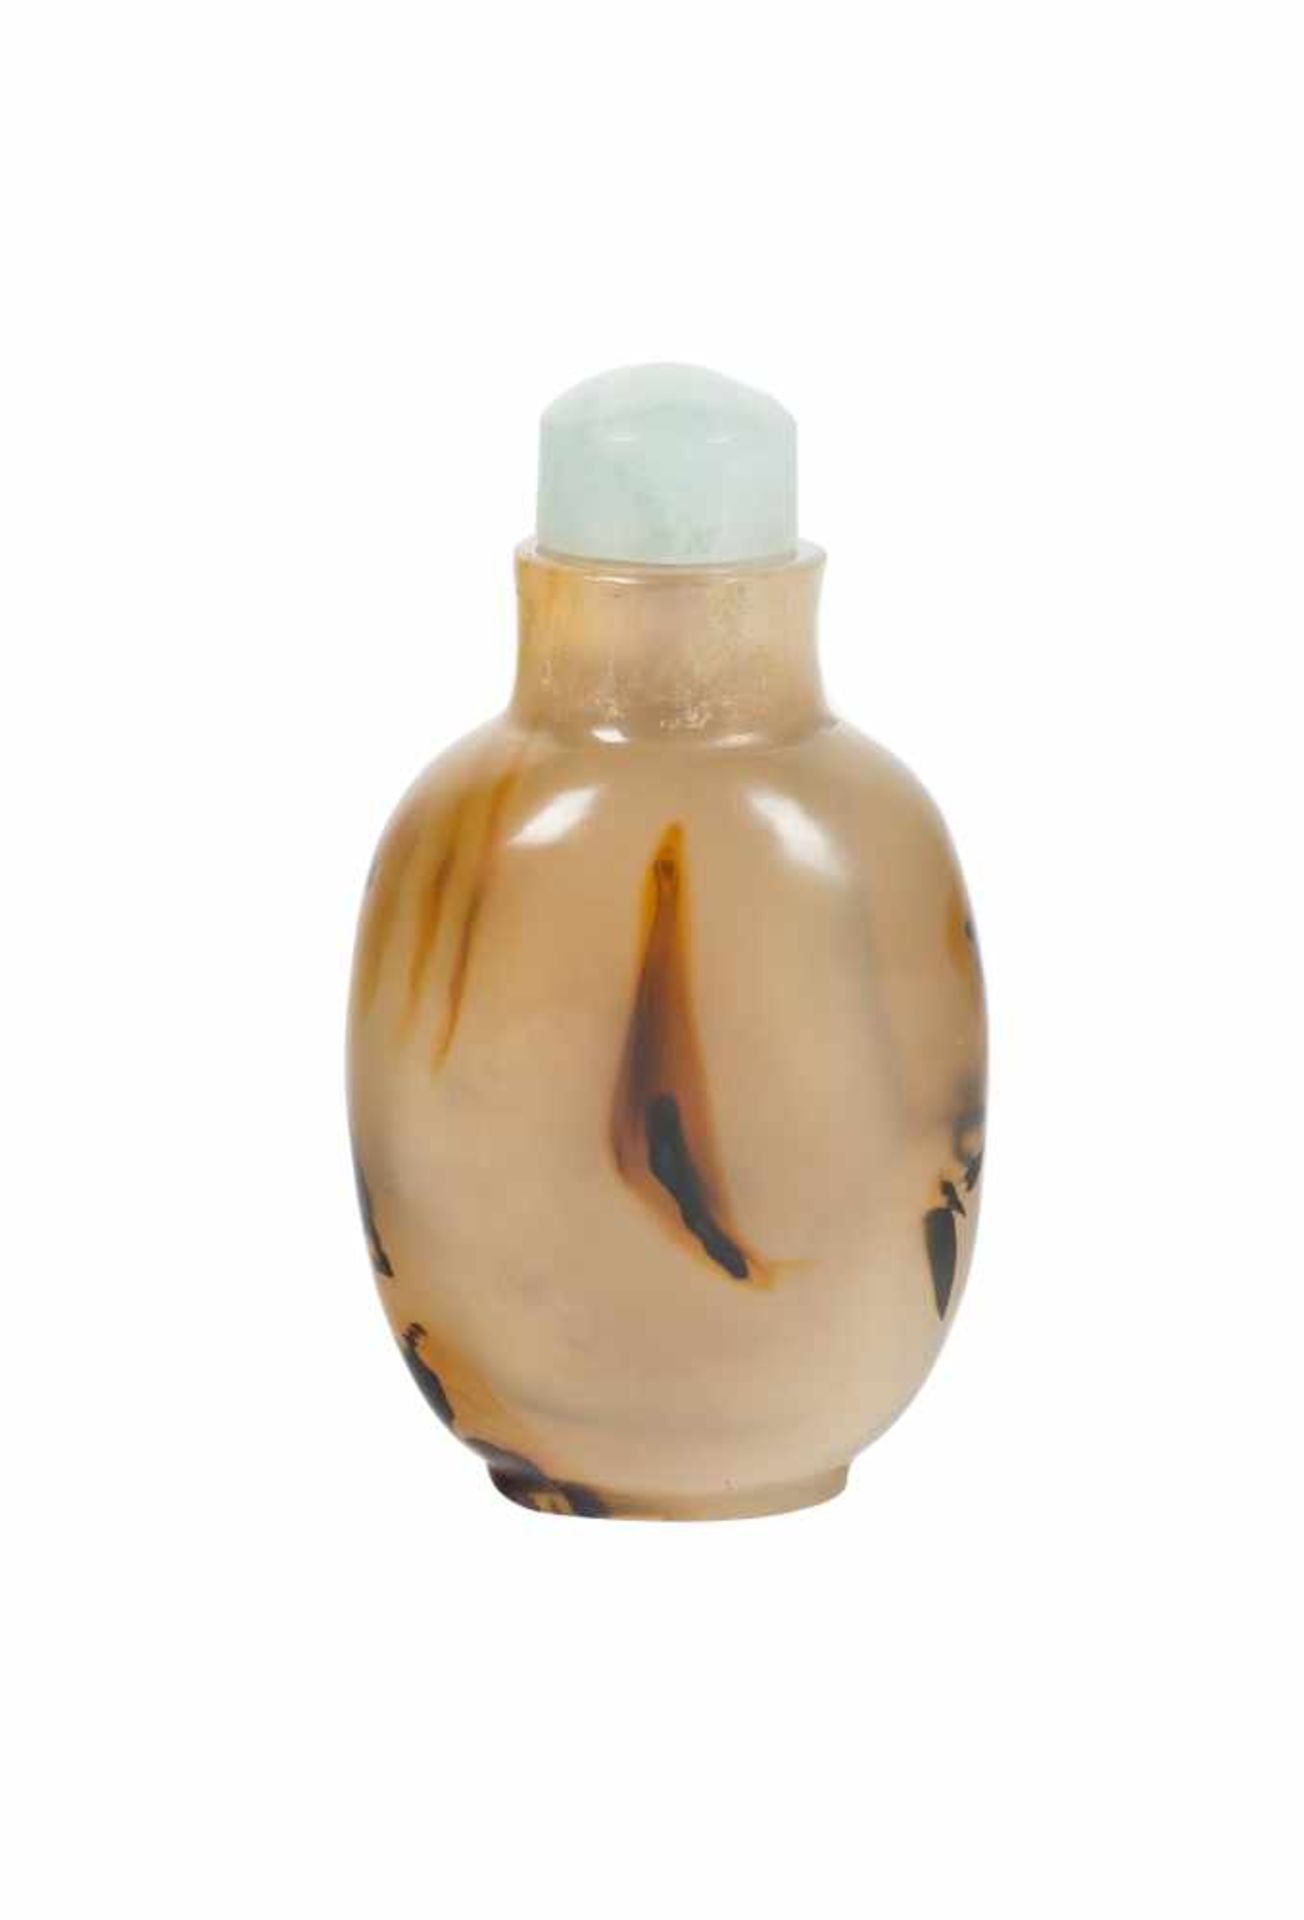 A carved dendritic agate snuff bottle. China. Qing dynasty. 18th-19th centuries. The rounded, s